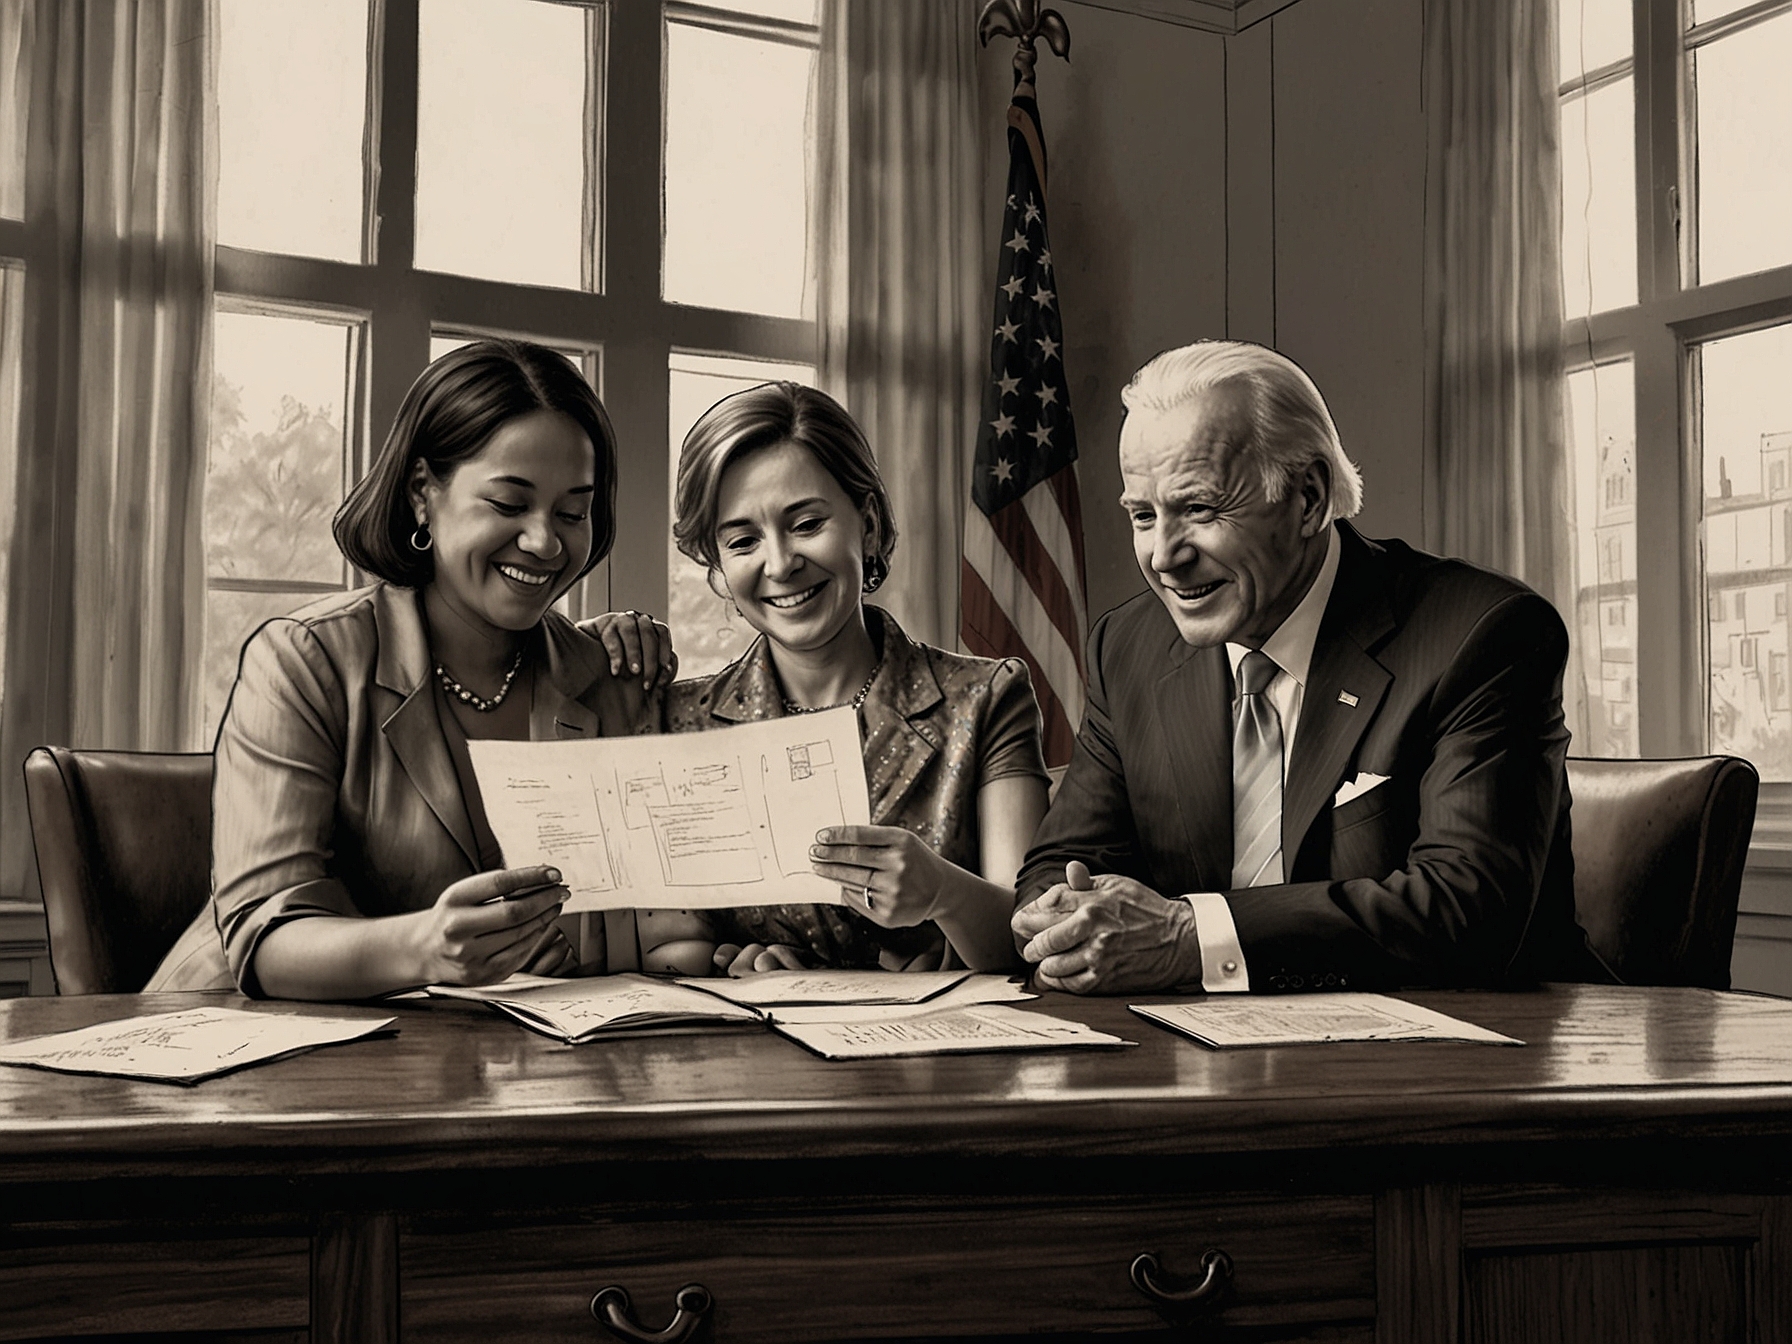 A family of immigrants, relieved and hopeful, gathers around a table with legal documents, symbolizing the potential benefits and new opportunities from Biden's proposed policy.